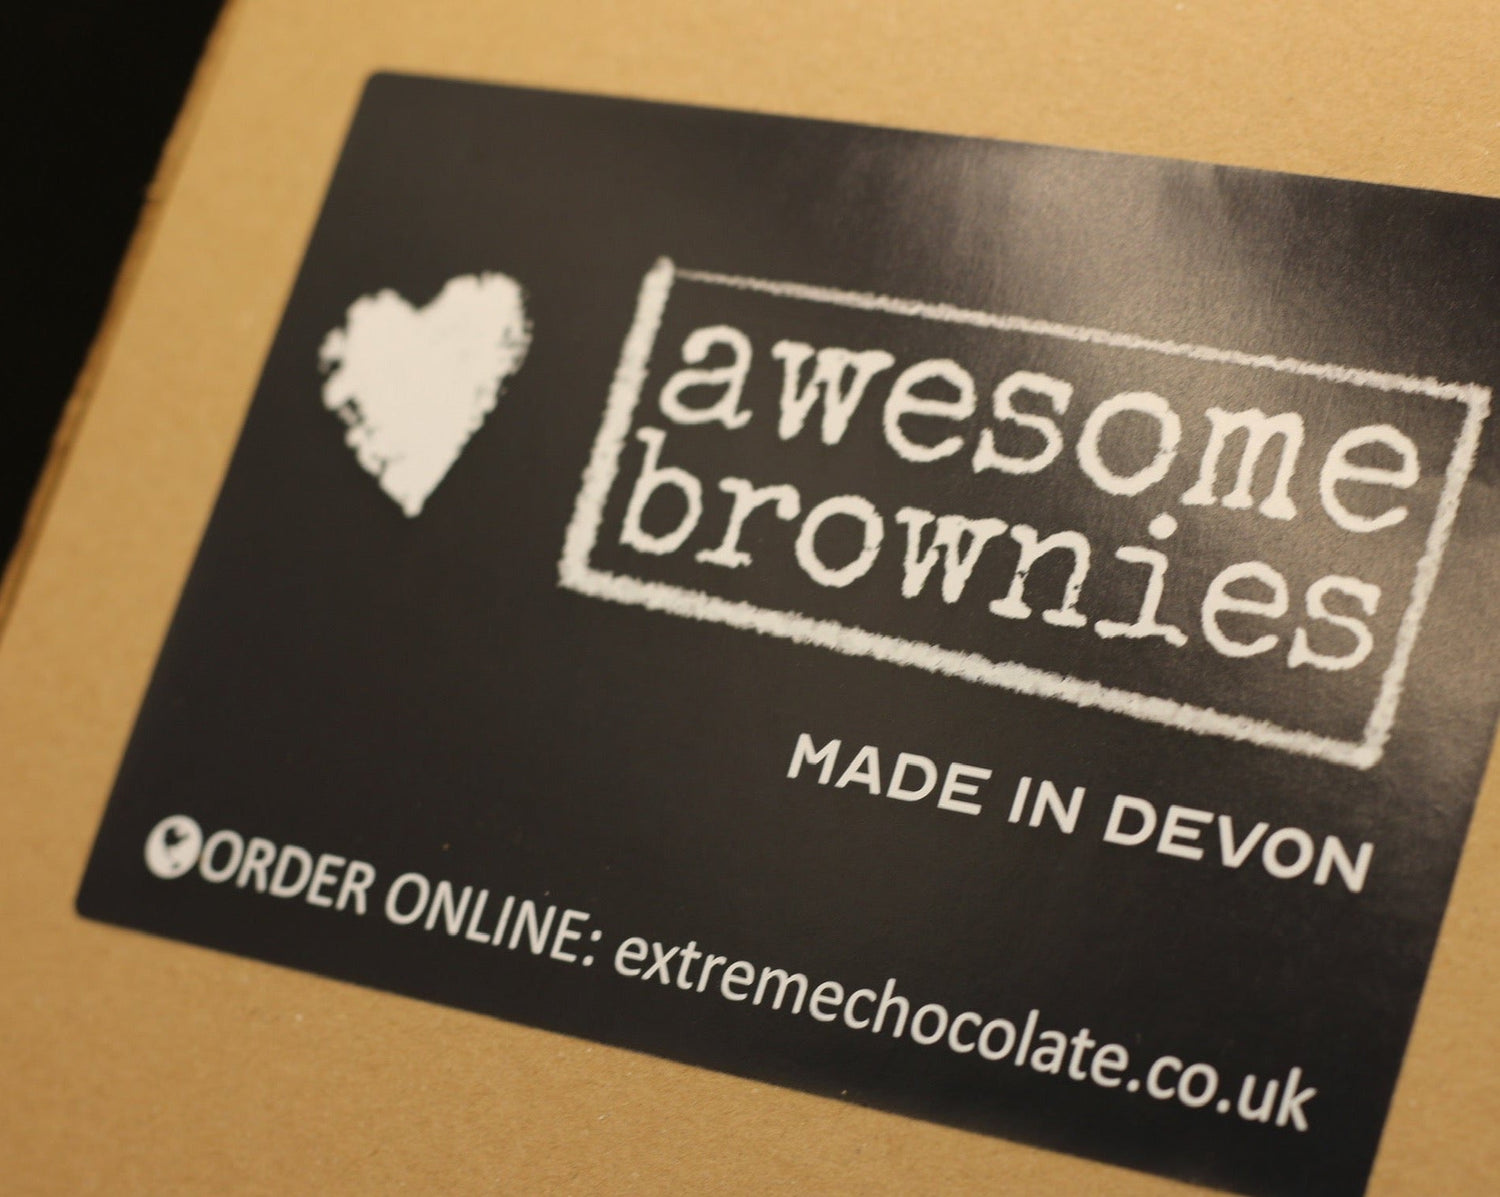 Box of 4 - Awesome brownies